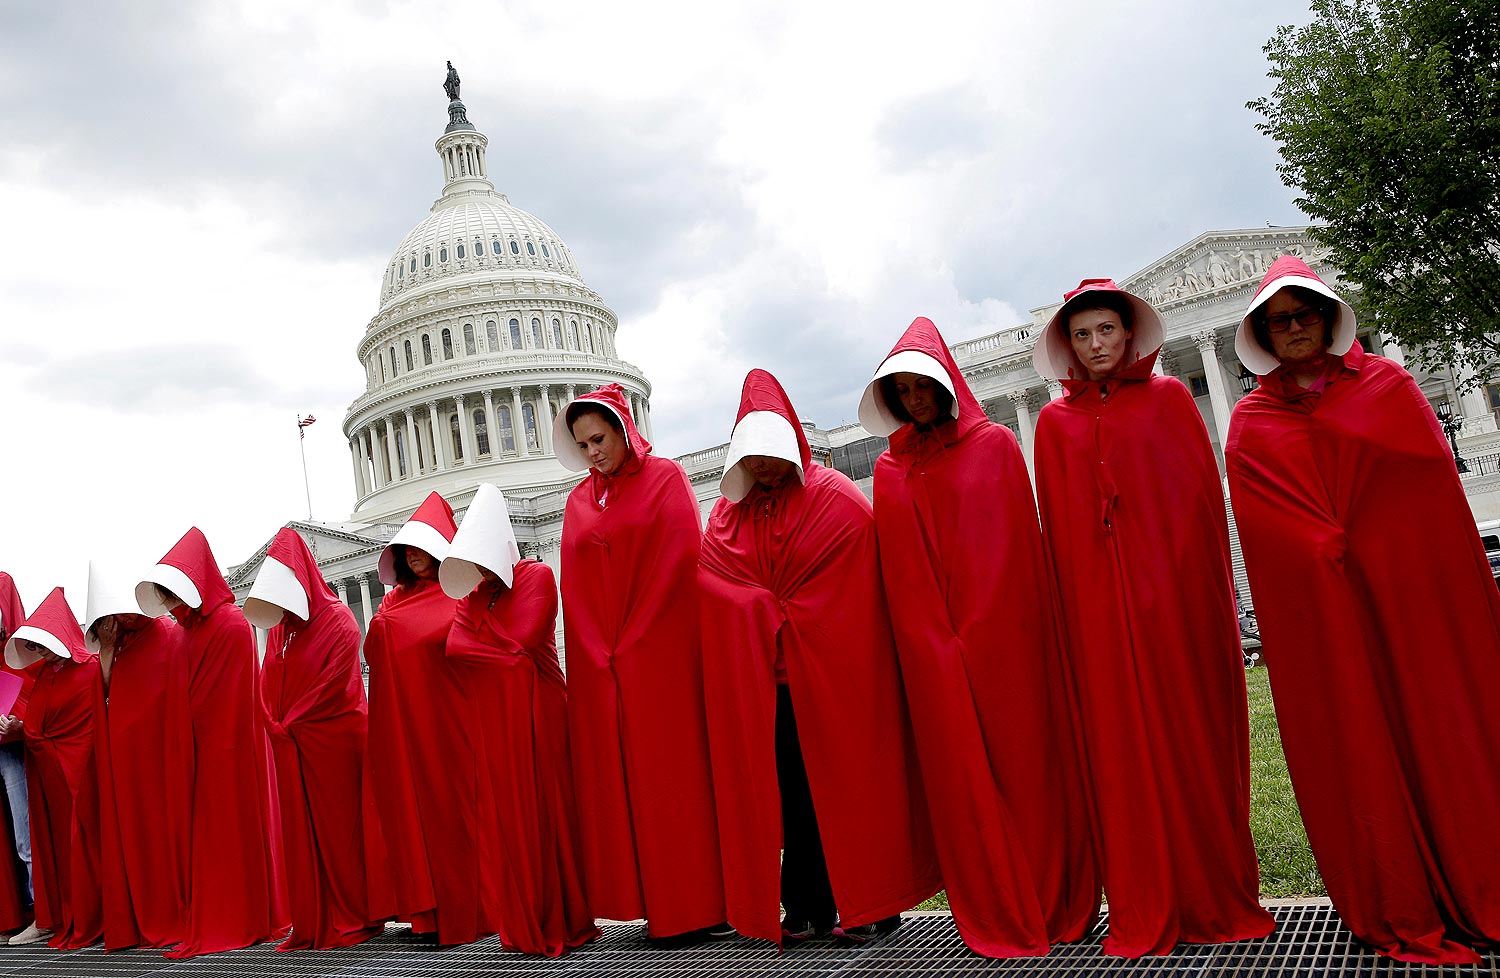 Women dressed as handmaids from the novel, film and television series "The Handmaid's Tale" demonstrate against cuts for Planned Parenthood in the Republican U.S. Senate healthcare bill at the Capitol in Washington, U.S., June 27, 2017. REUTERS/Joshua Roberts TPX IMAGES OF THE DAY ORG XMIT: WAS714